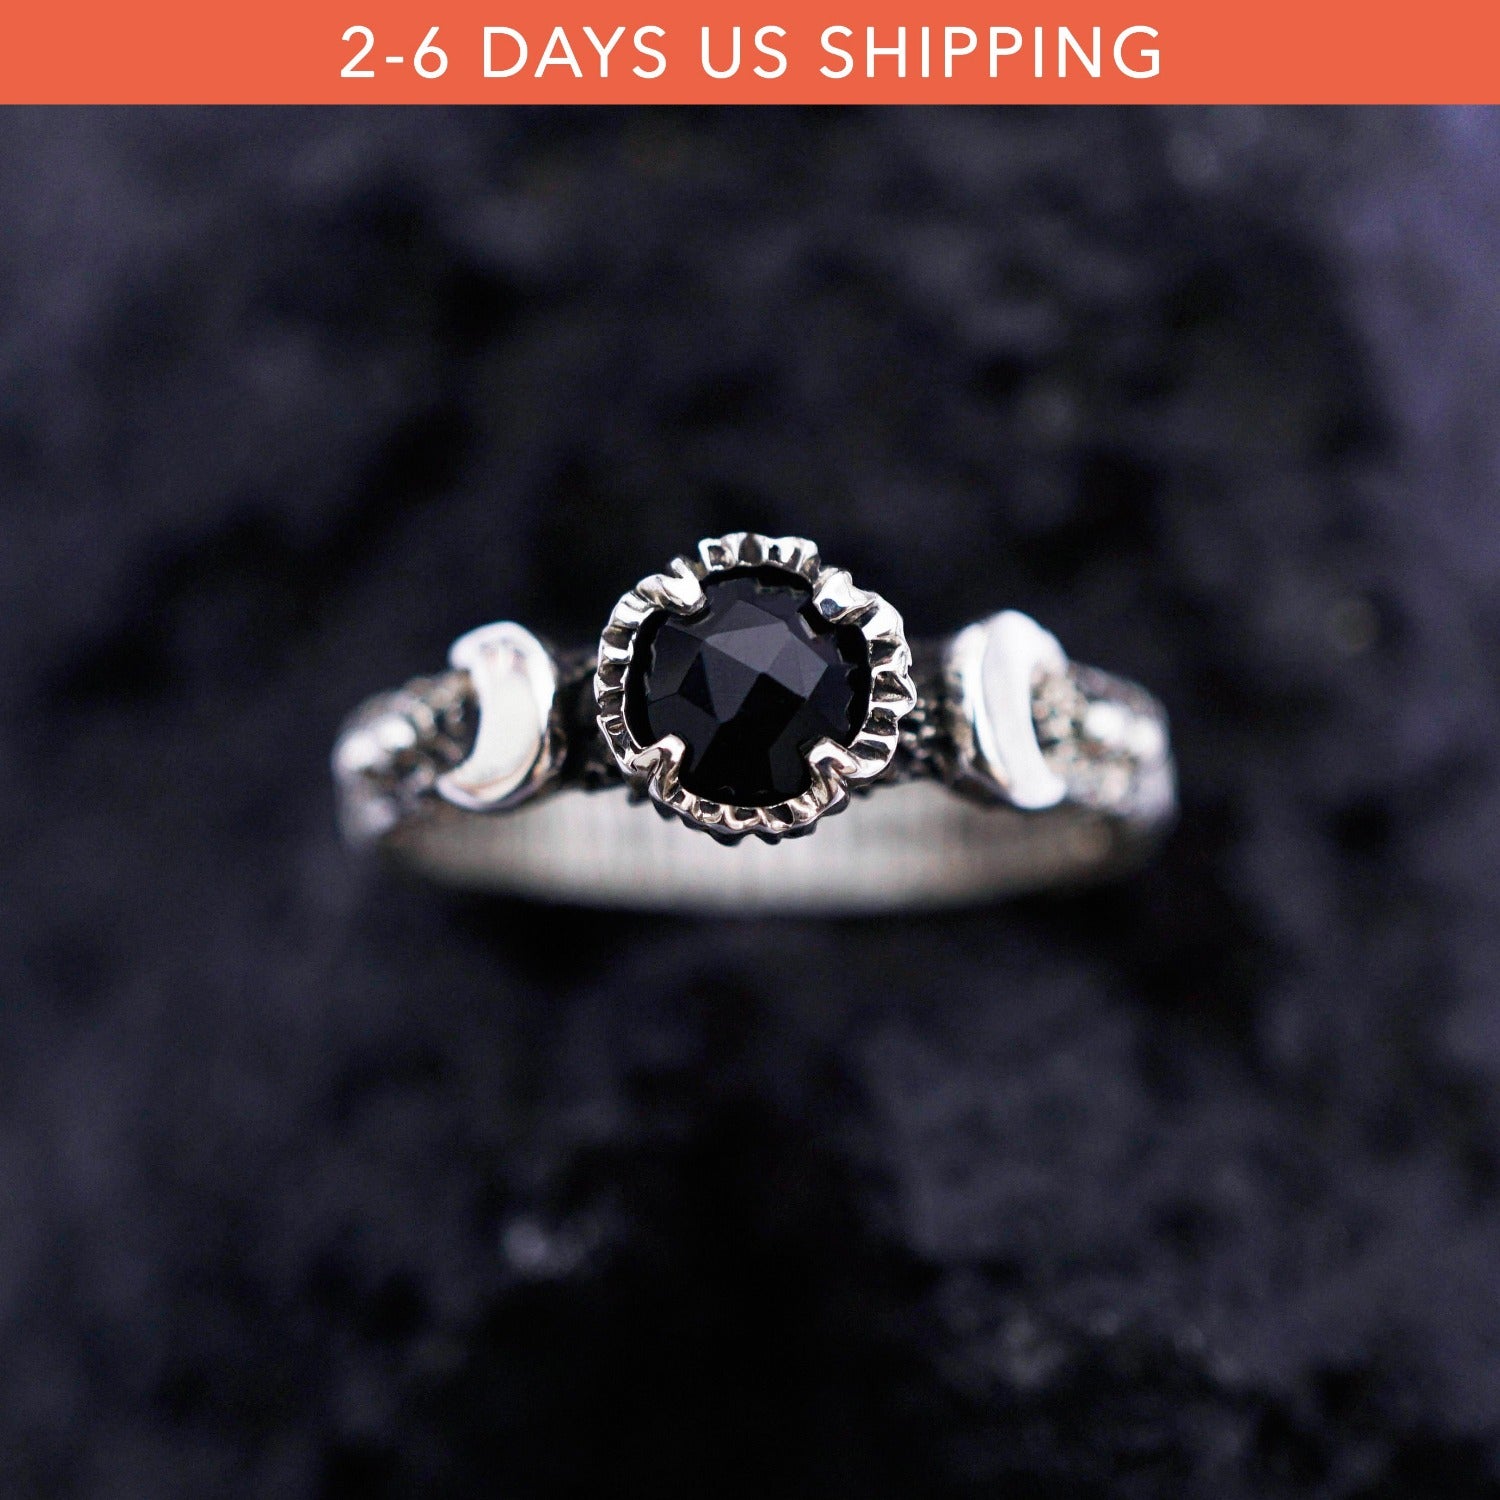 Black Moon ring Gothic engagement ring Black Onyx ring Moon phases ring from the Sterling silver 925 